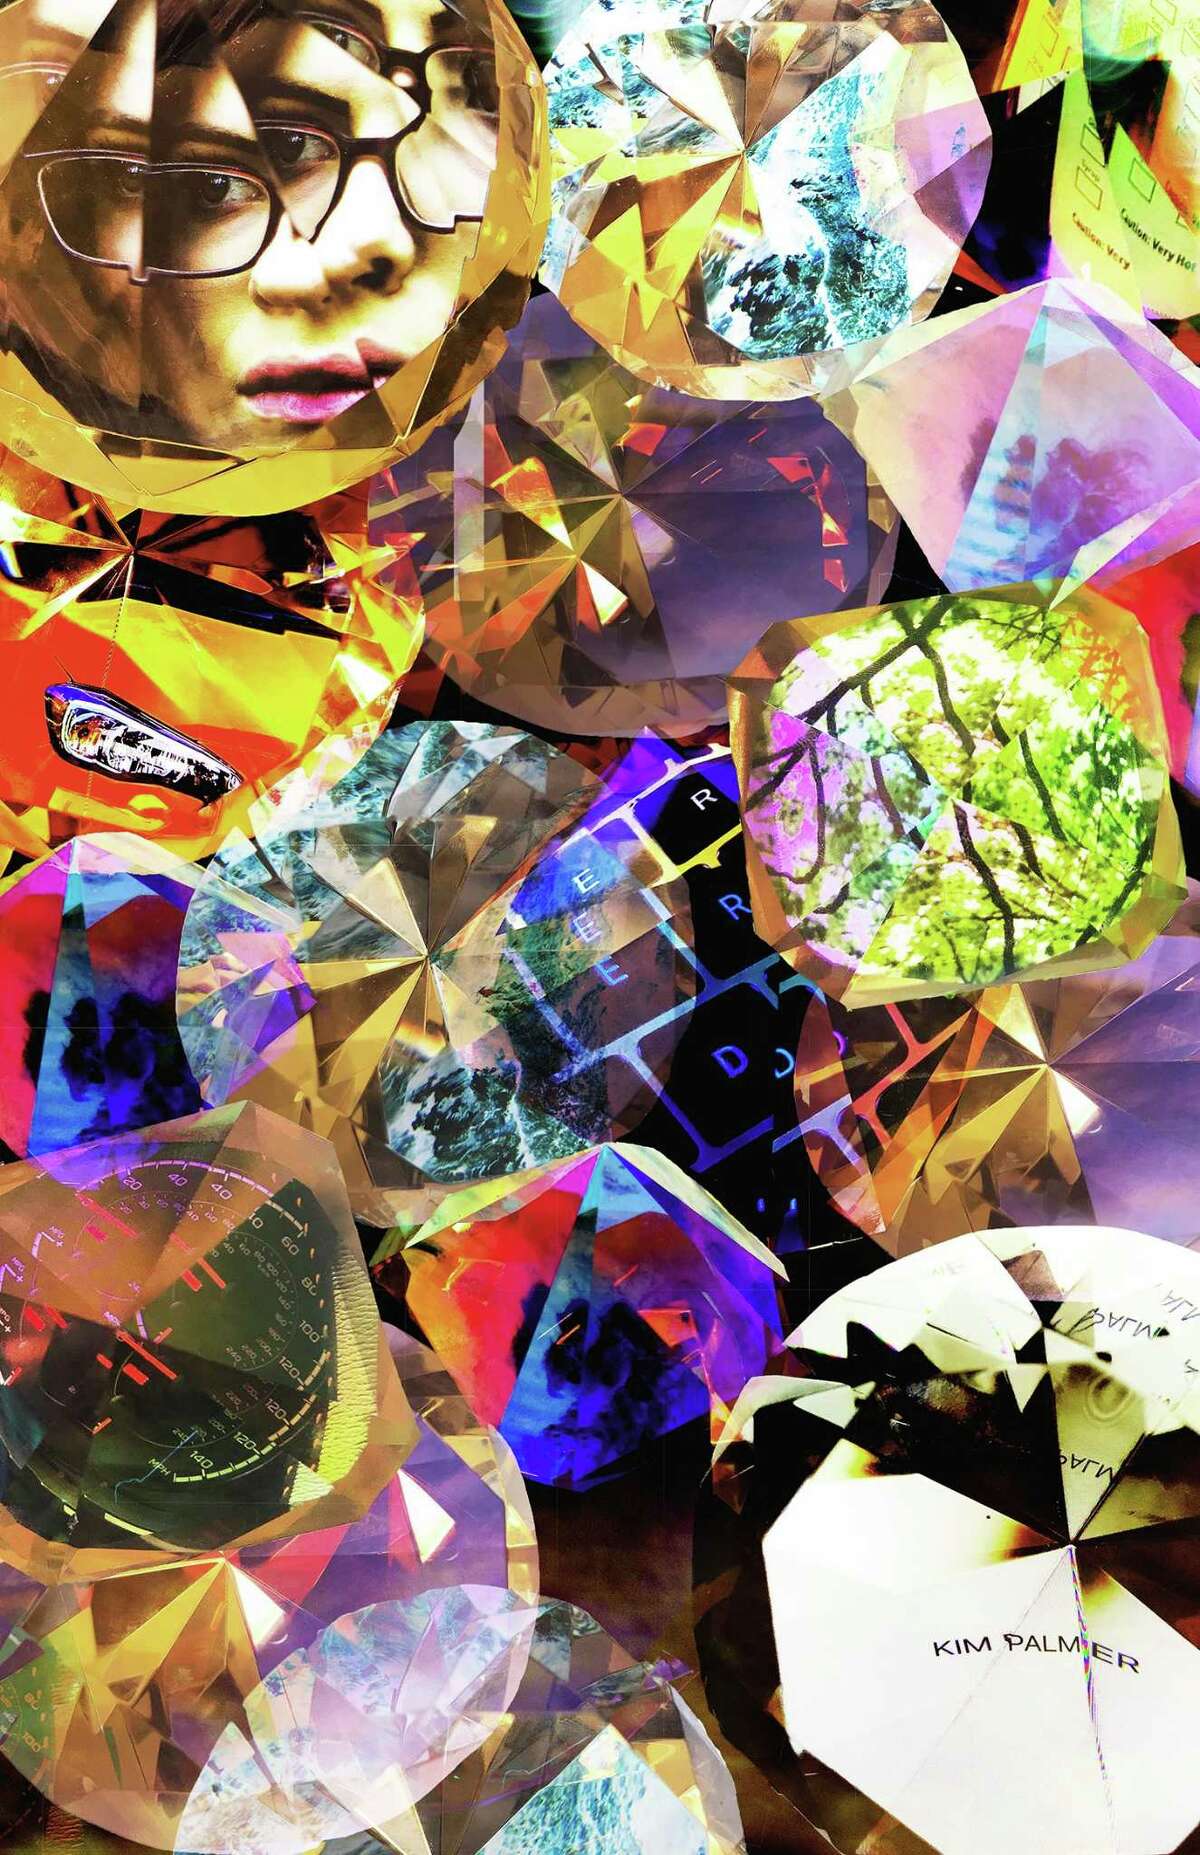 New Milford Graphic Design senior Kimberly Palmer’s “Self portrait,” a prismatic photography　collage and poster combining prismatic photography and graphic design — winner of the Department of Art Senior Portfolio Exhibition Poster Competition.